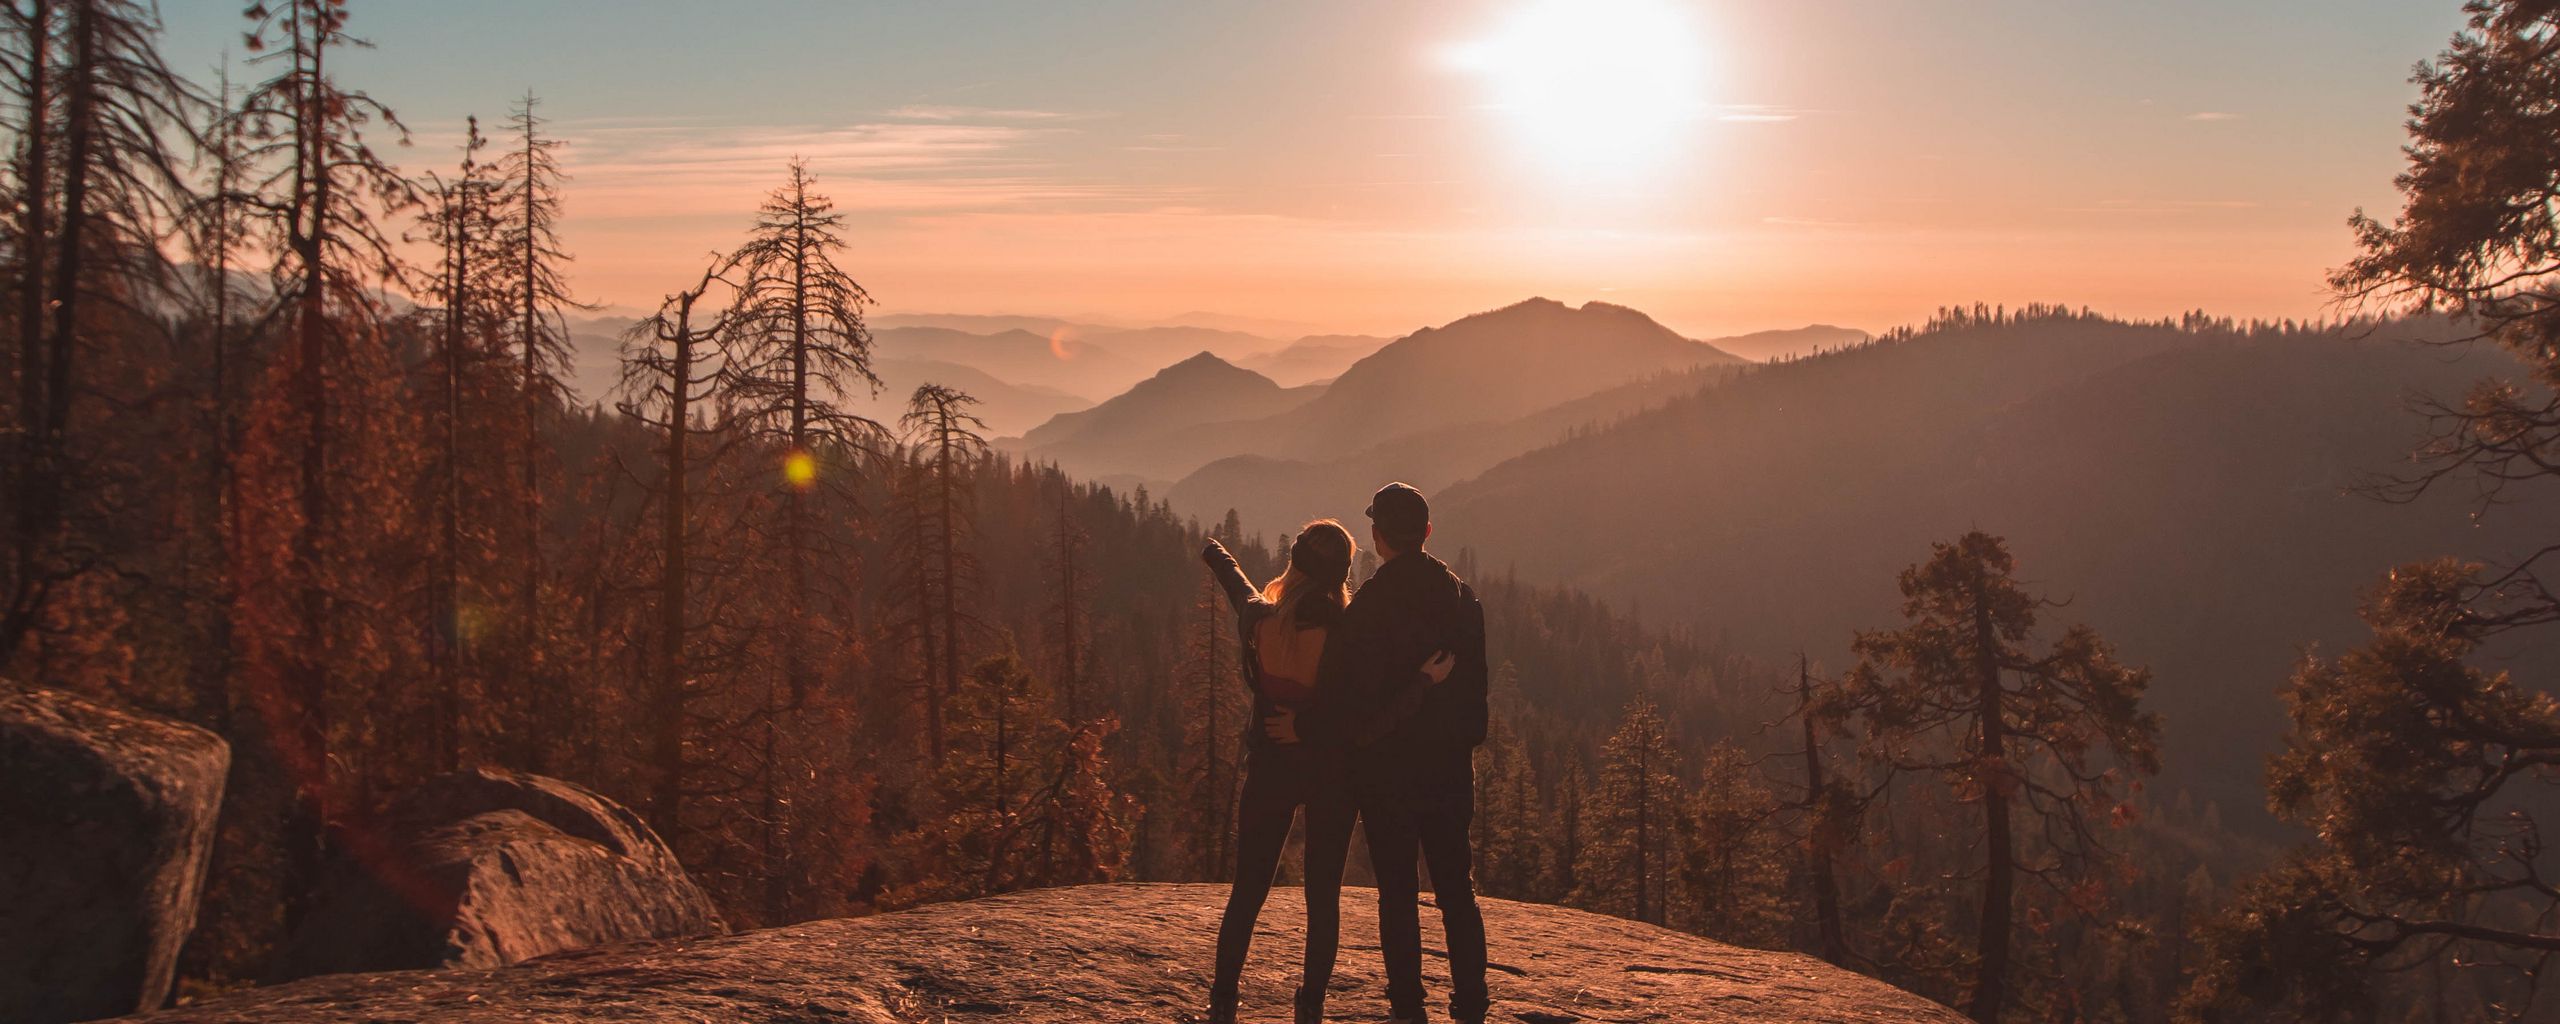 2560x1024 Wallpaper couple, mountains, travel, sunset, sequoia national park, united states